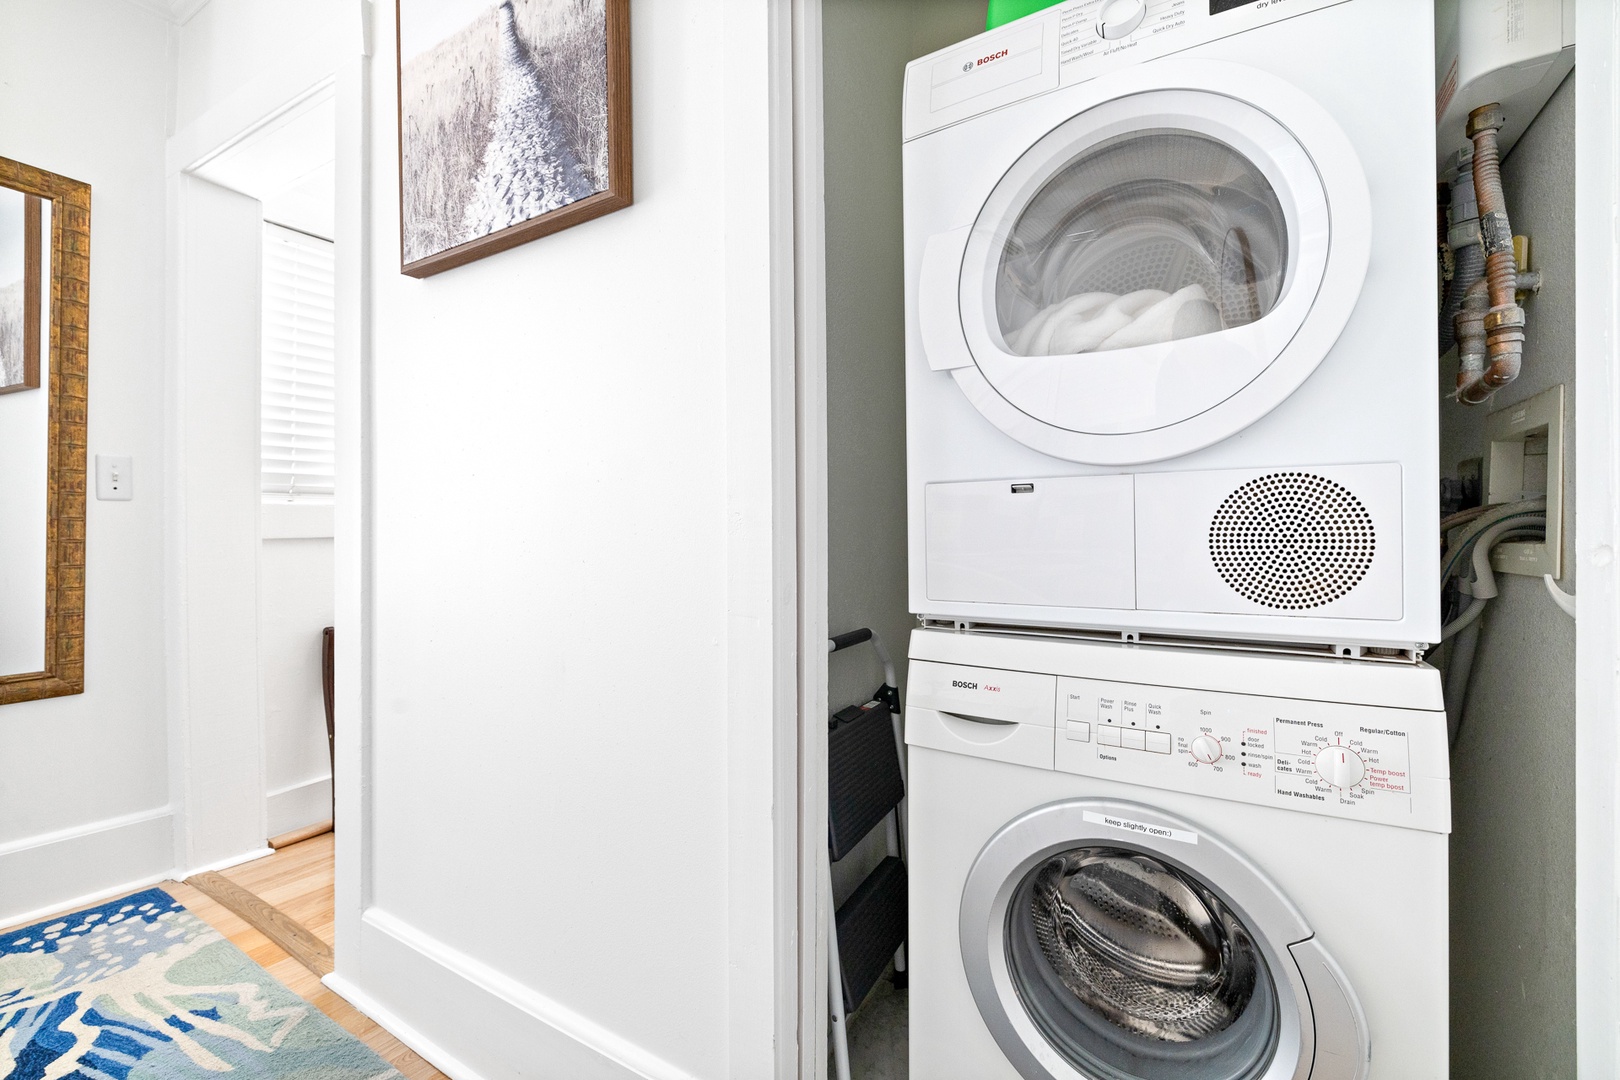 Private laundry is available for your stay, tucked away in the master bedroom